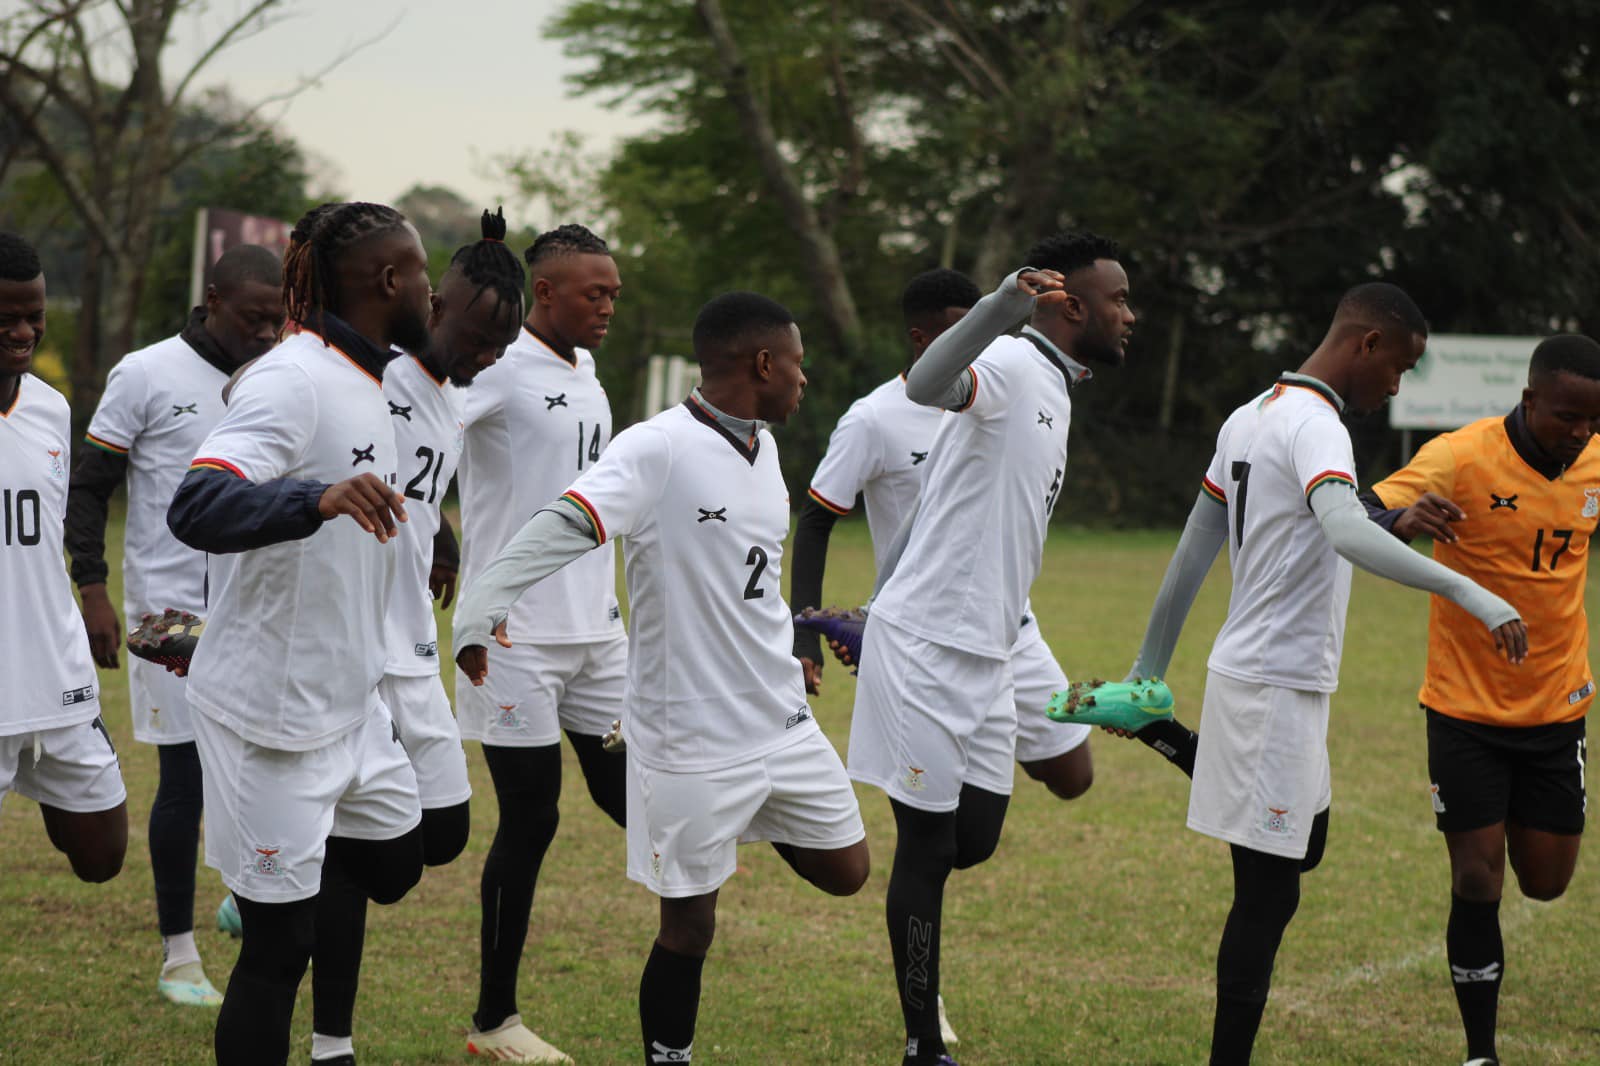 Zambia's Chipolopolo Boys Gears Up for COSAFA Cup Opener With Malawi